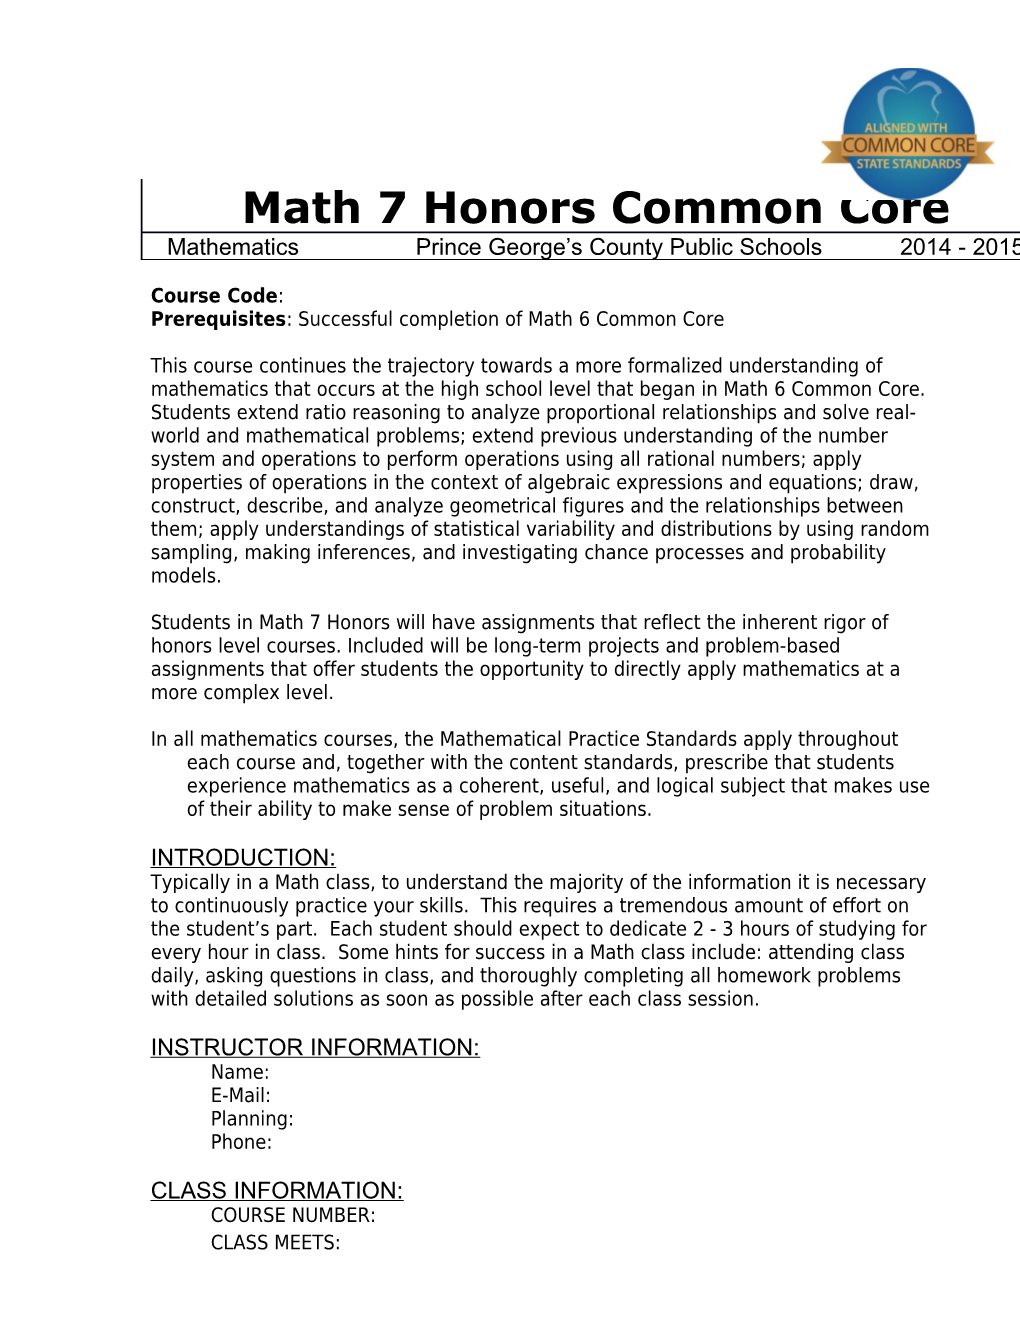 Math 7 Honors Common Core